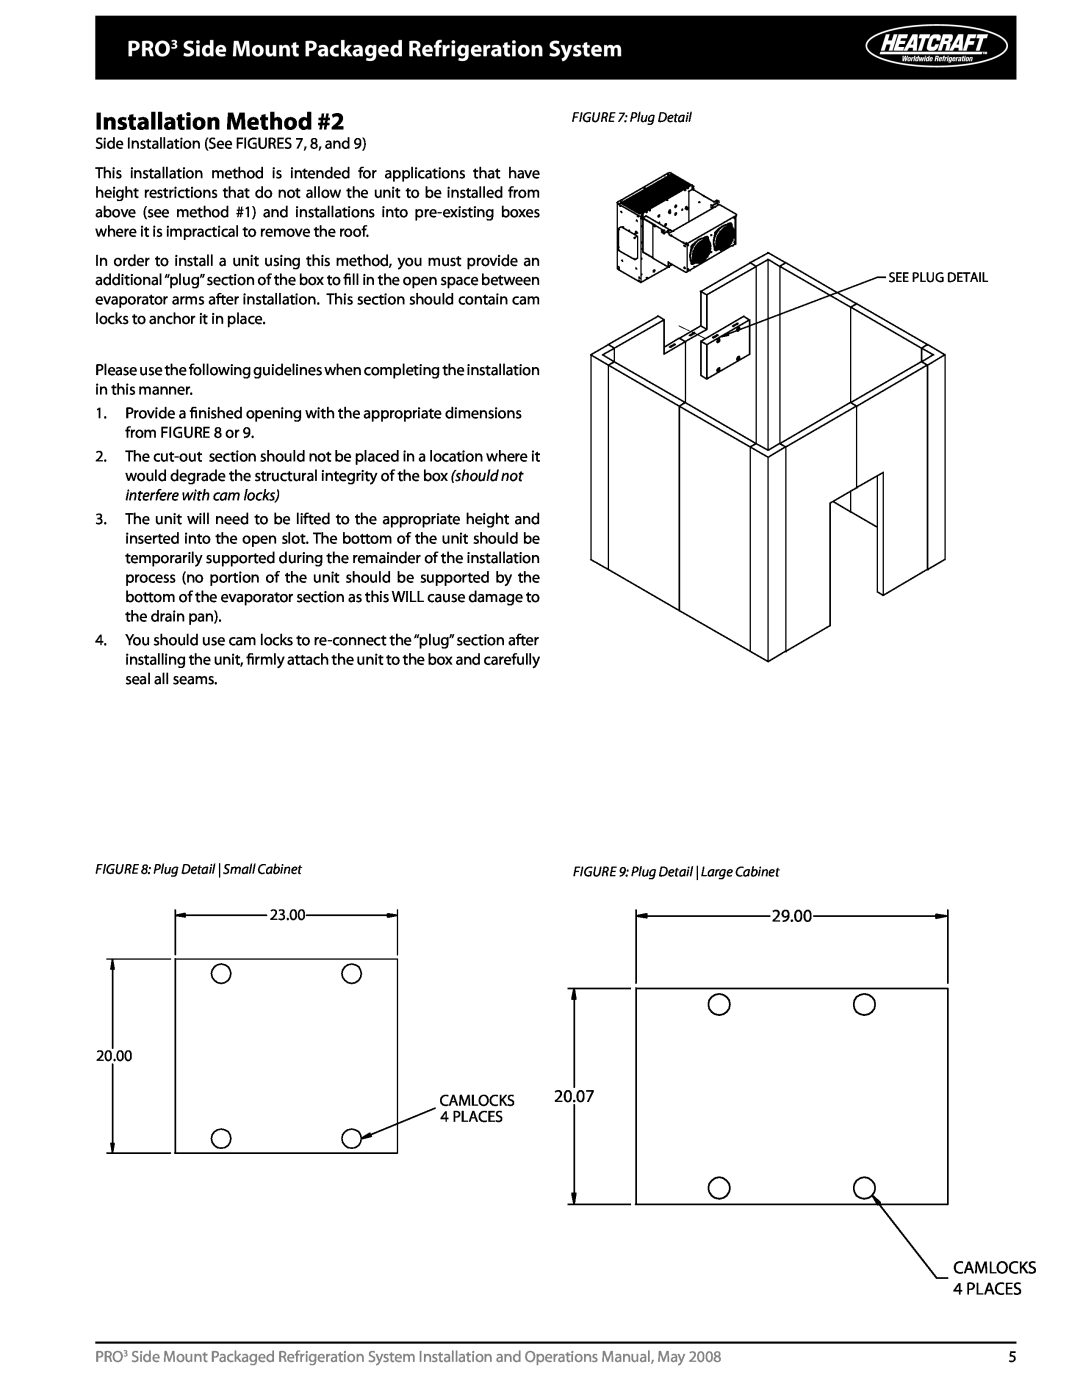 Heatcraft Refrigeration Products Installation Method #2, PRO3 Side Mount Packaged Refrigeration System, 29.00, 20.07 